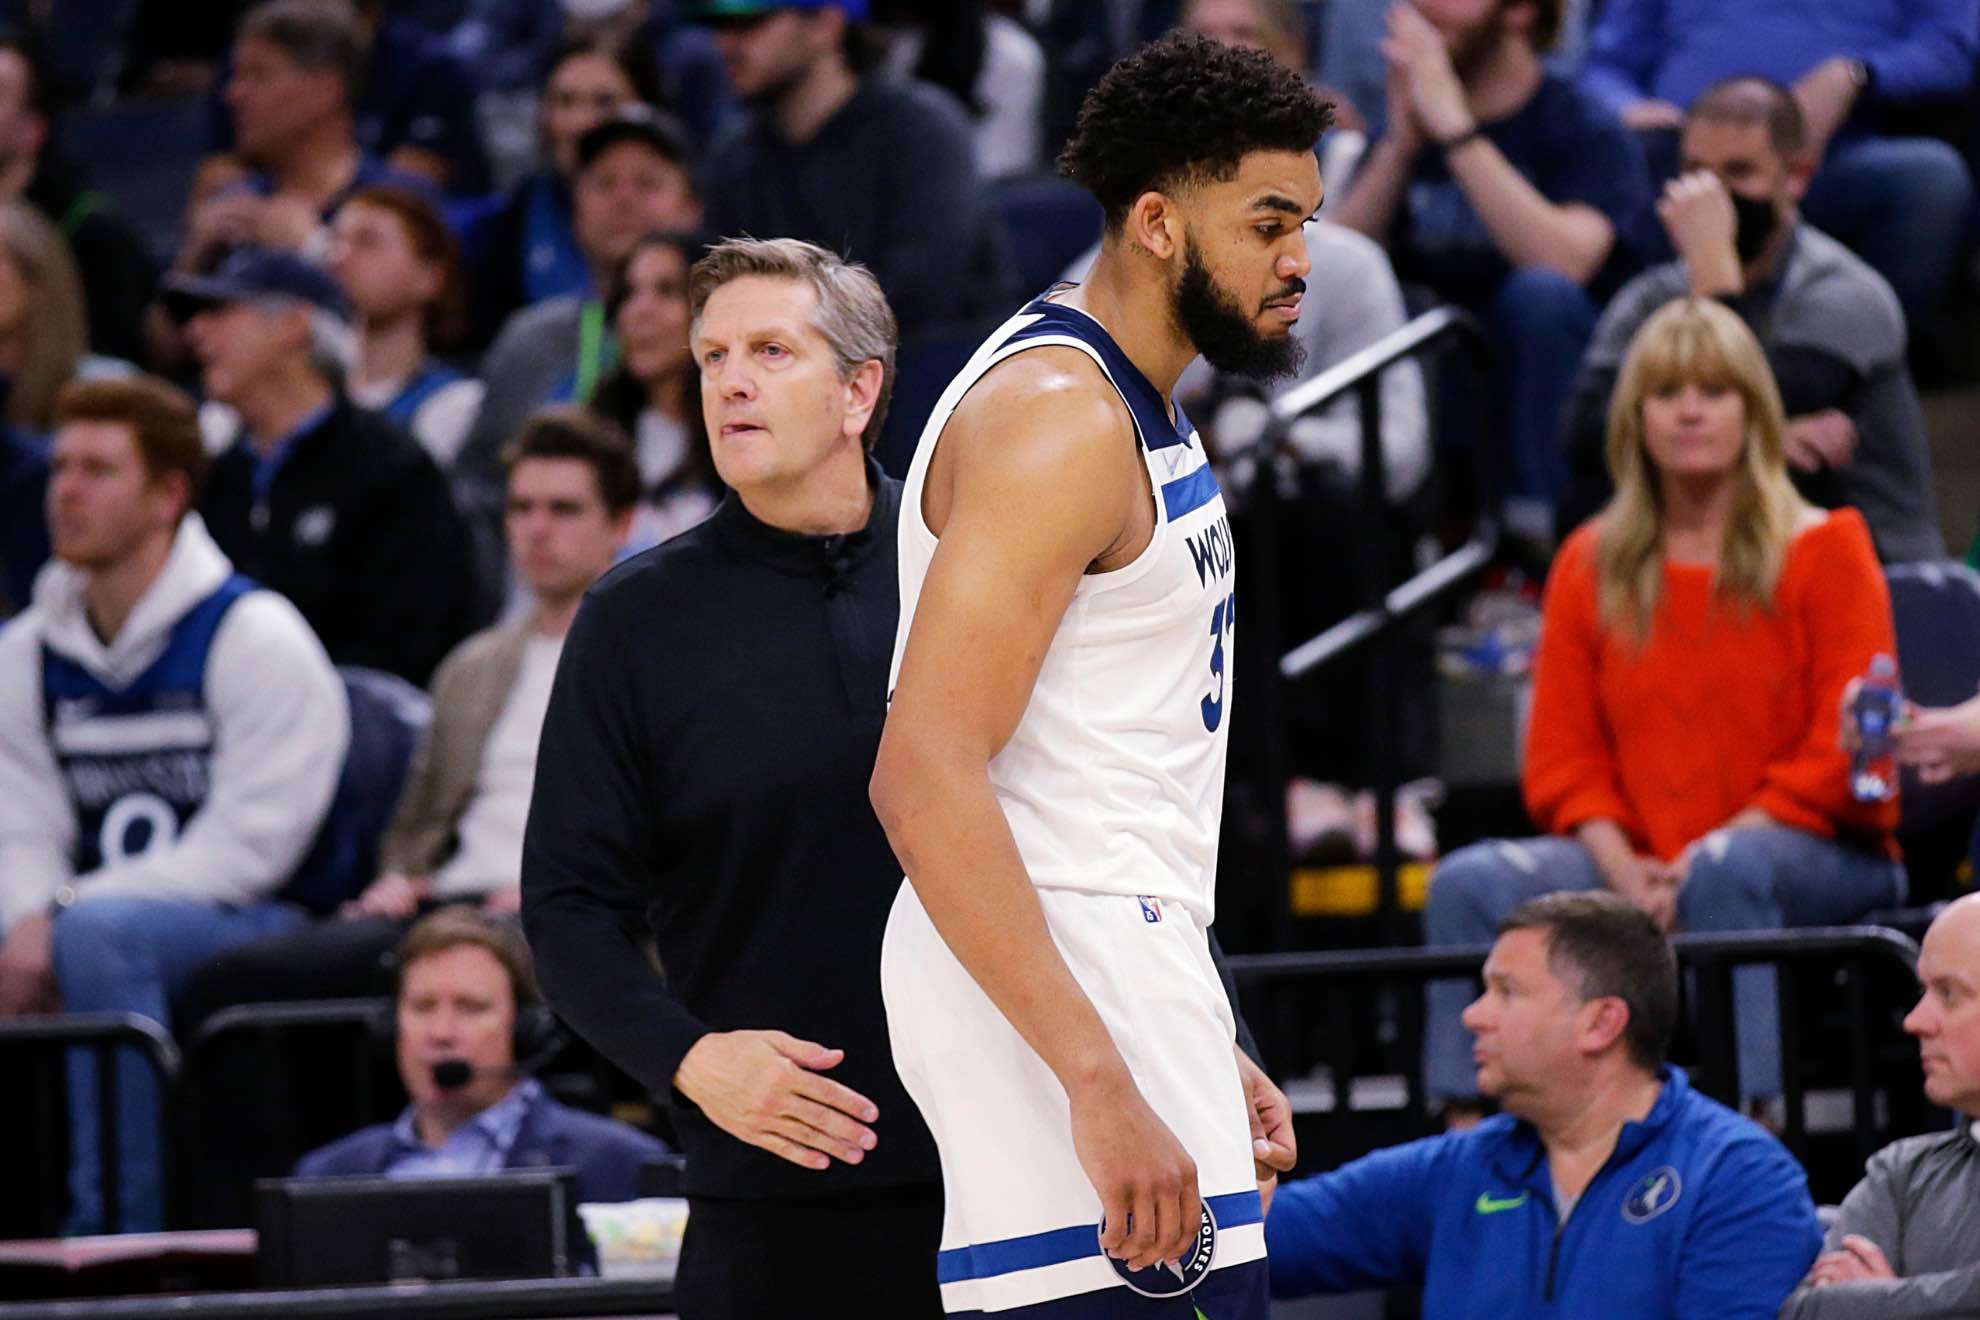 Chris Finch was not impressed with Karl-Anthony Towns career night